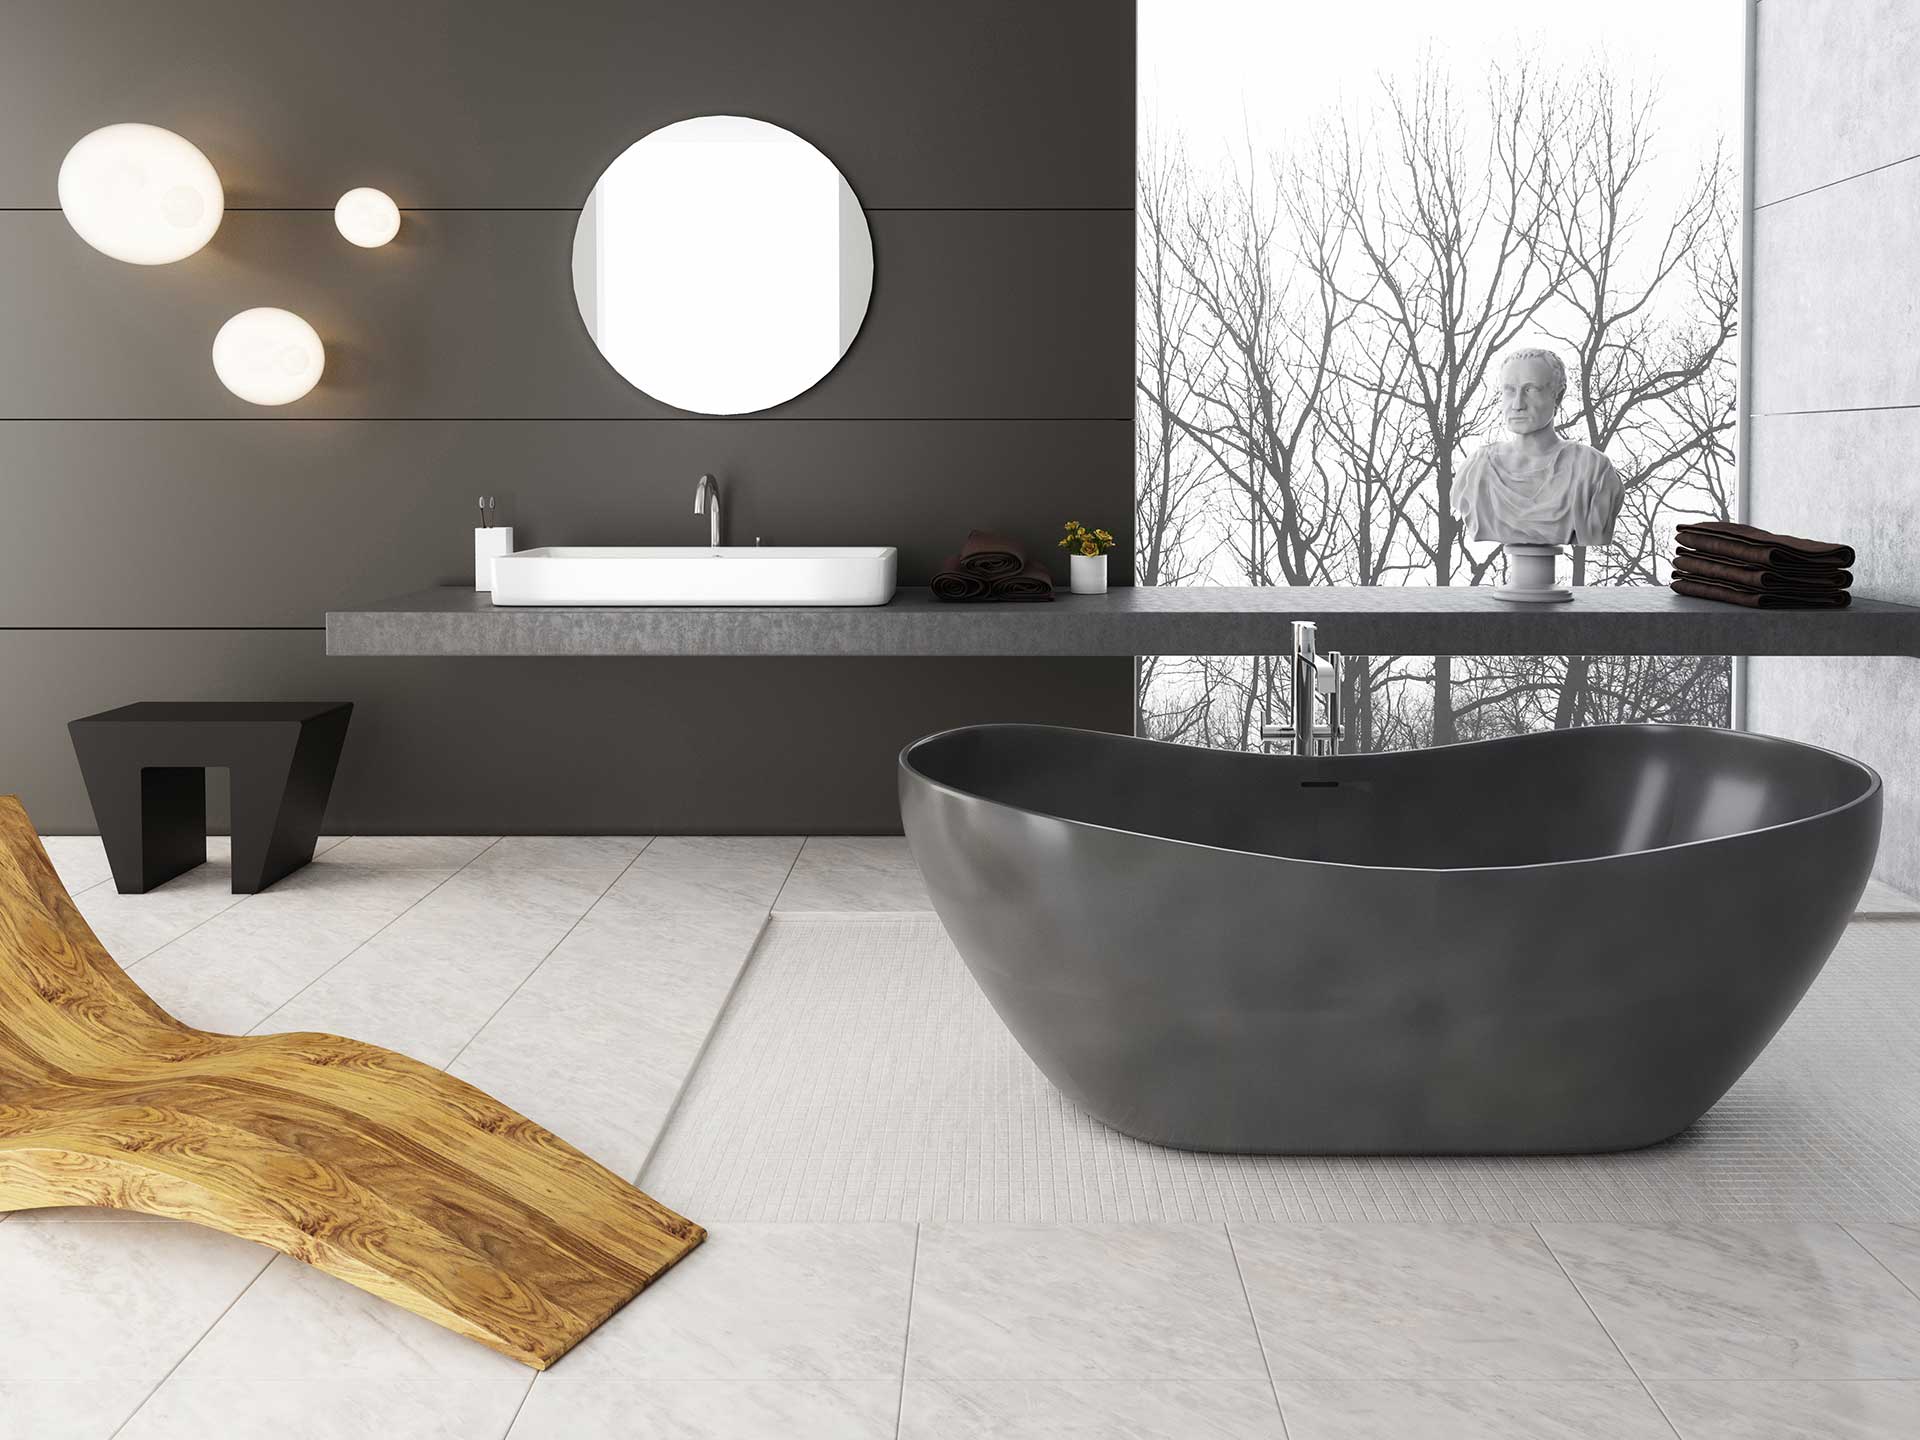 Extraordinary bathroom furniture: How to create personal aesthetics with shapes ...